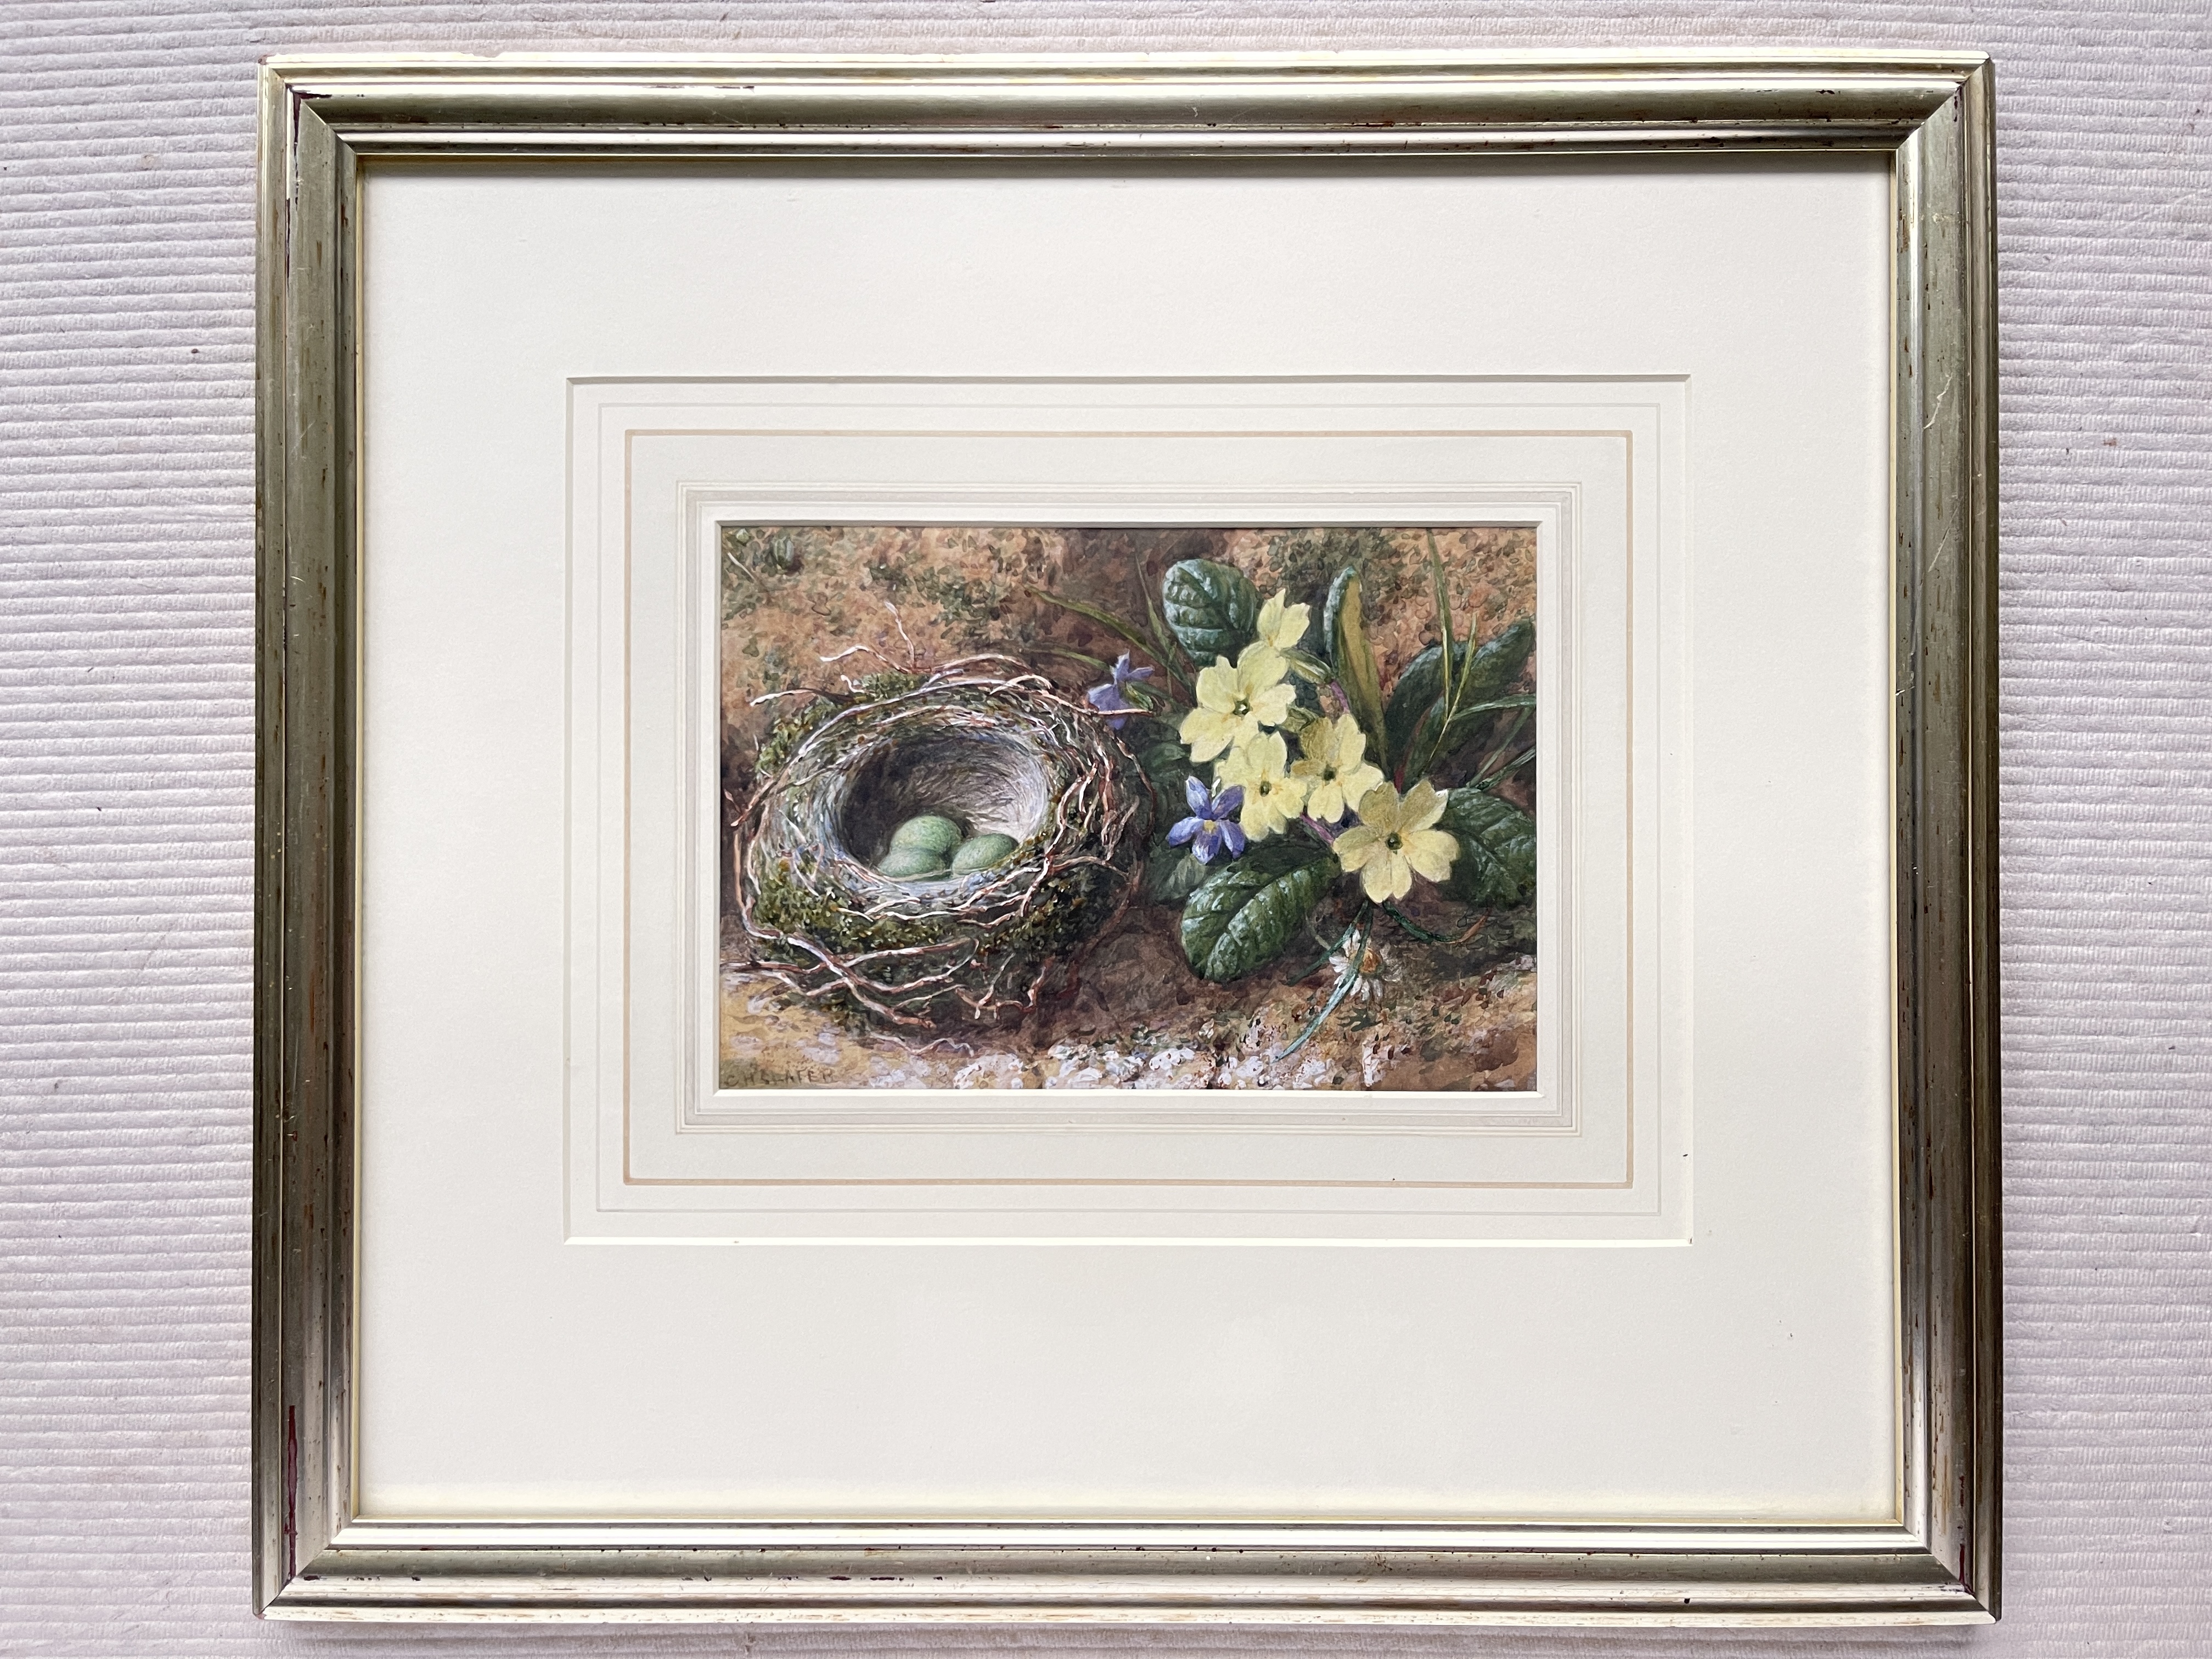 Charles Henry Slater (British, c.1820-1890), still life of a bird nest with eggs and yellow - Image 6 of 8